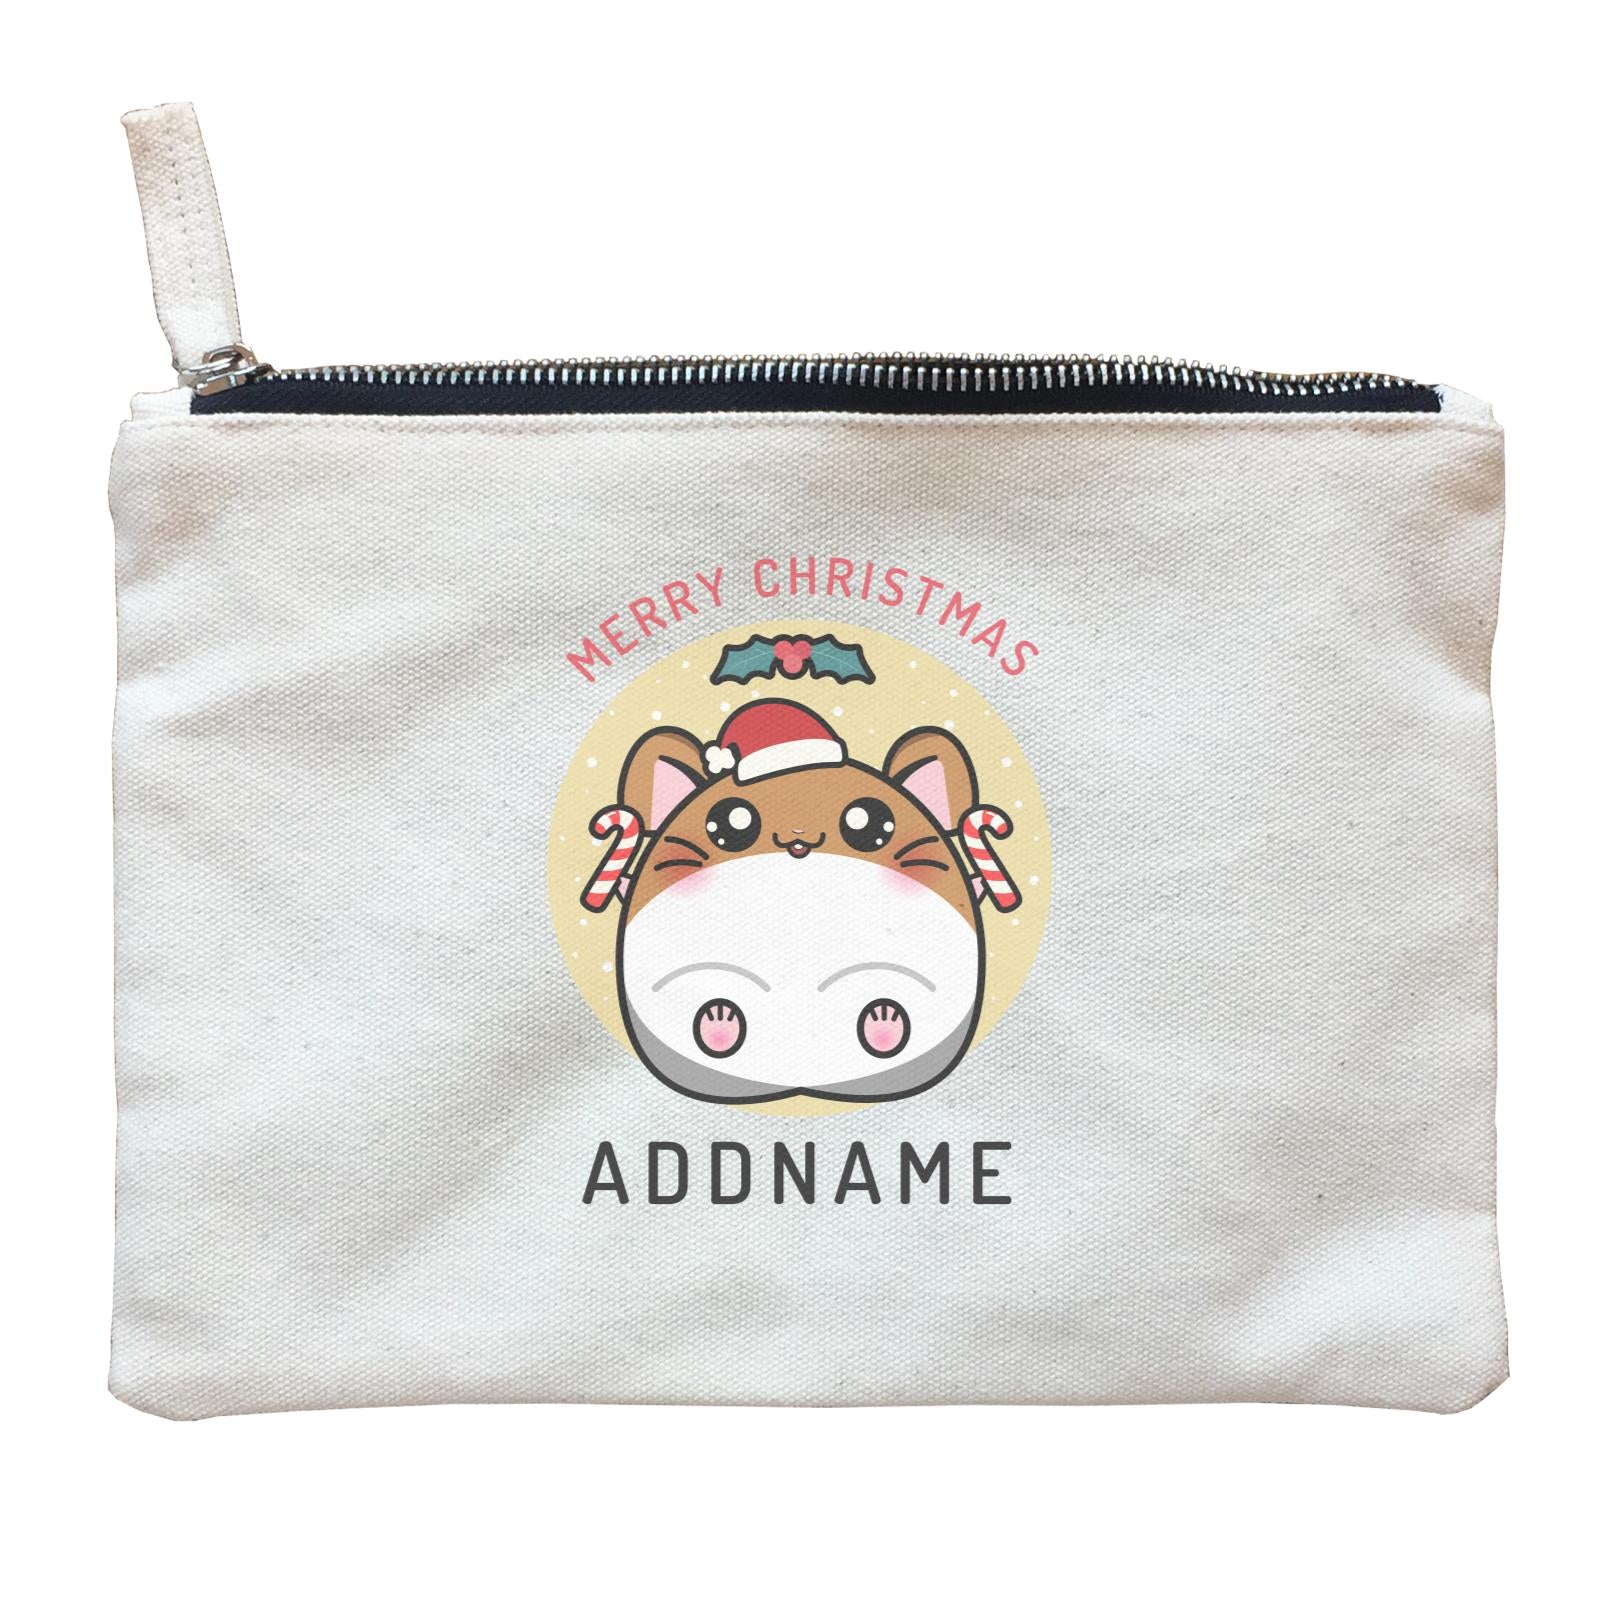 Merry Christmas Cute Santa Boy Hamster with Candy Cane Zipper Pouch